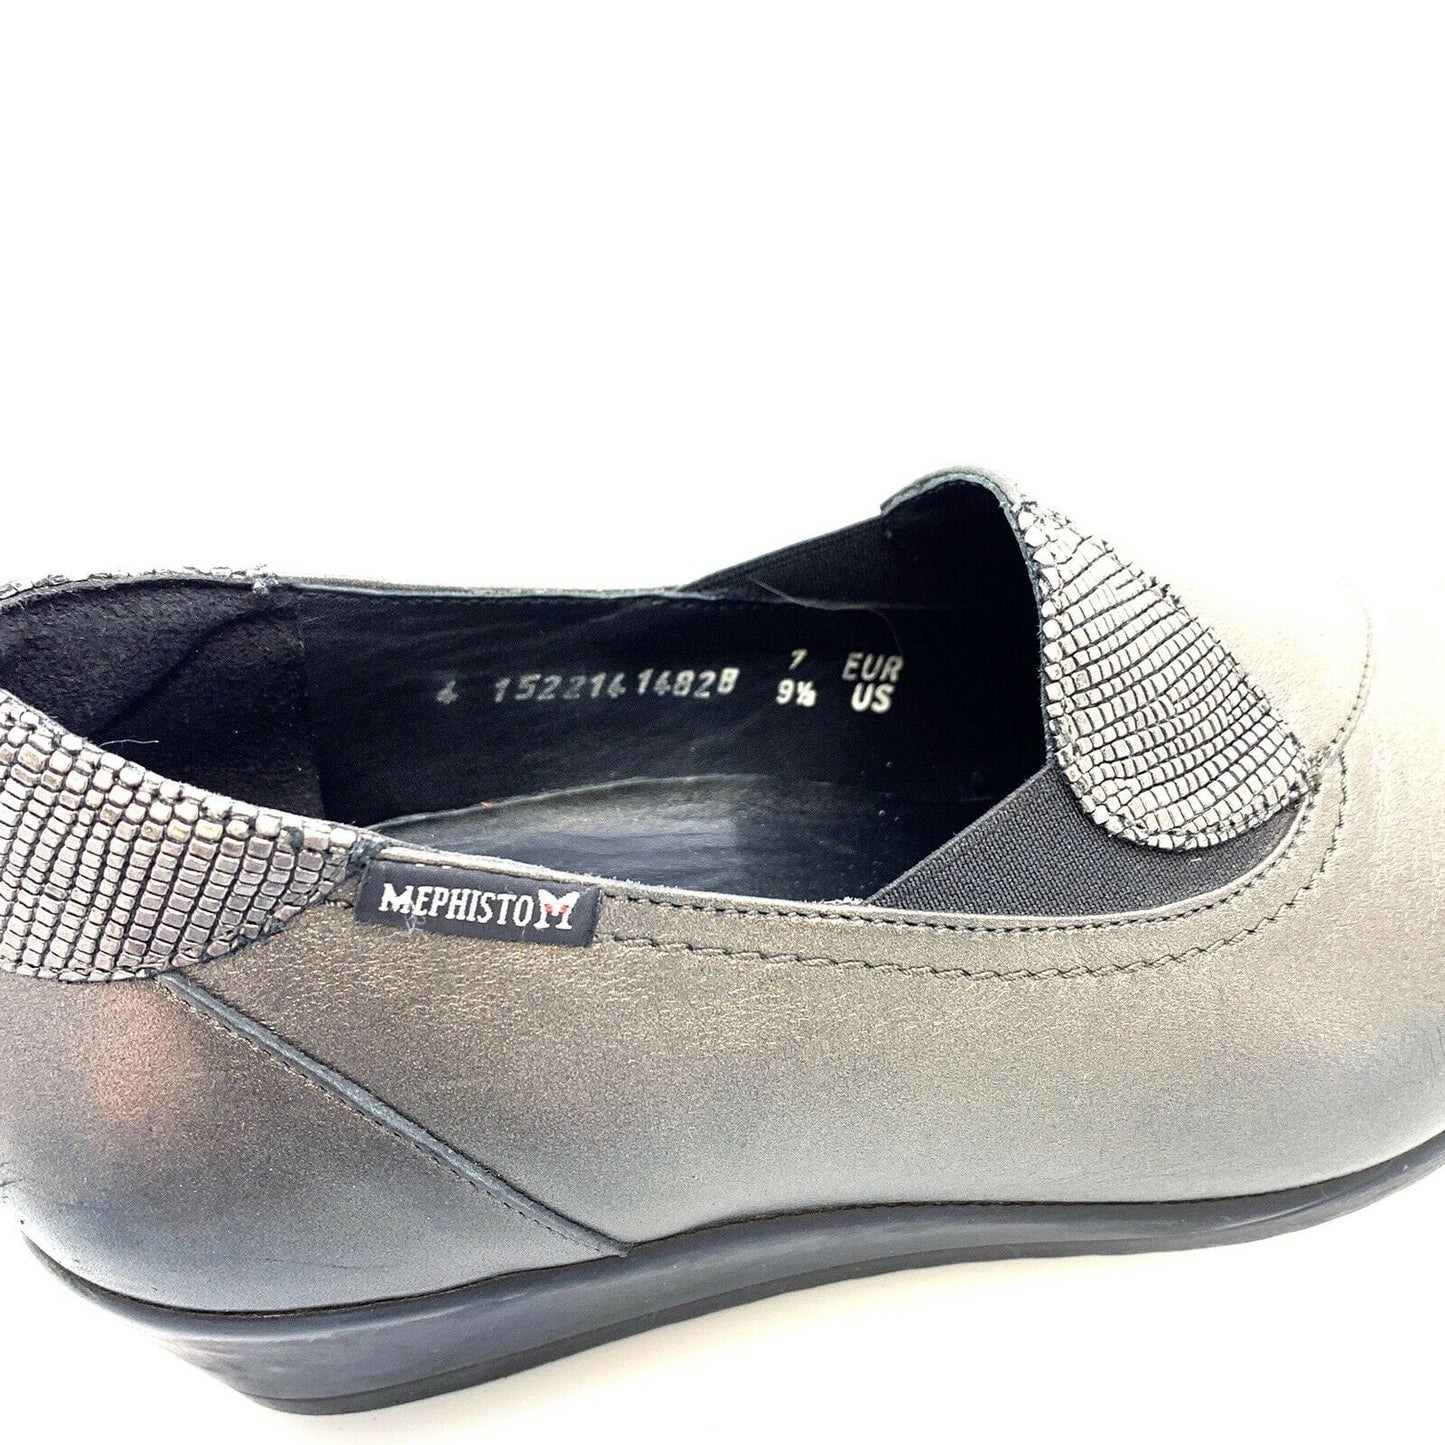 MEPHISTO Womens Size 9.5 Gray 'Giacinta' Leather Wedge Pumps Comfort